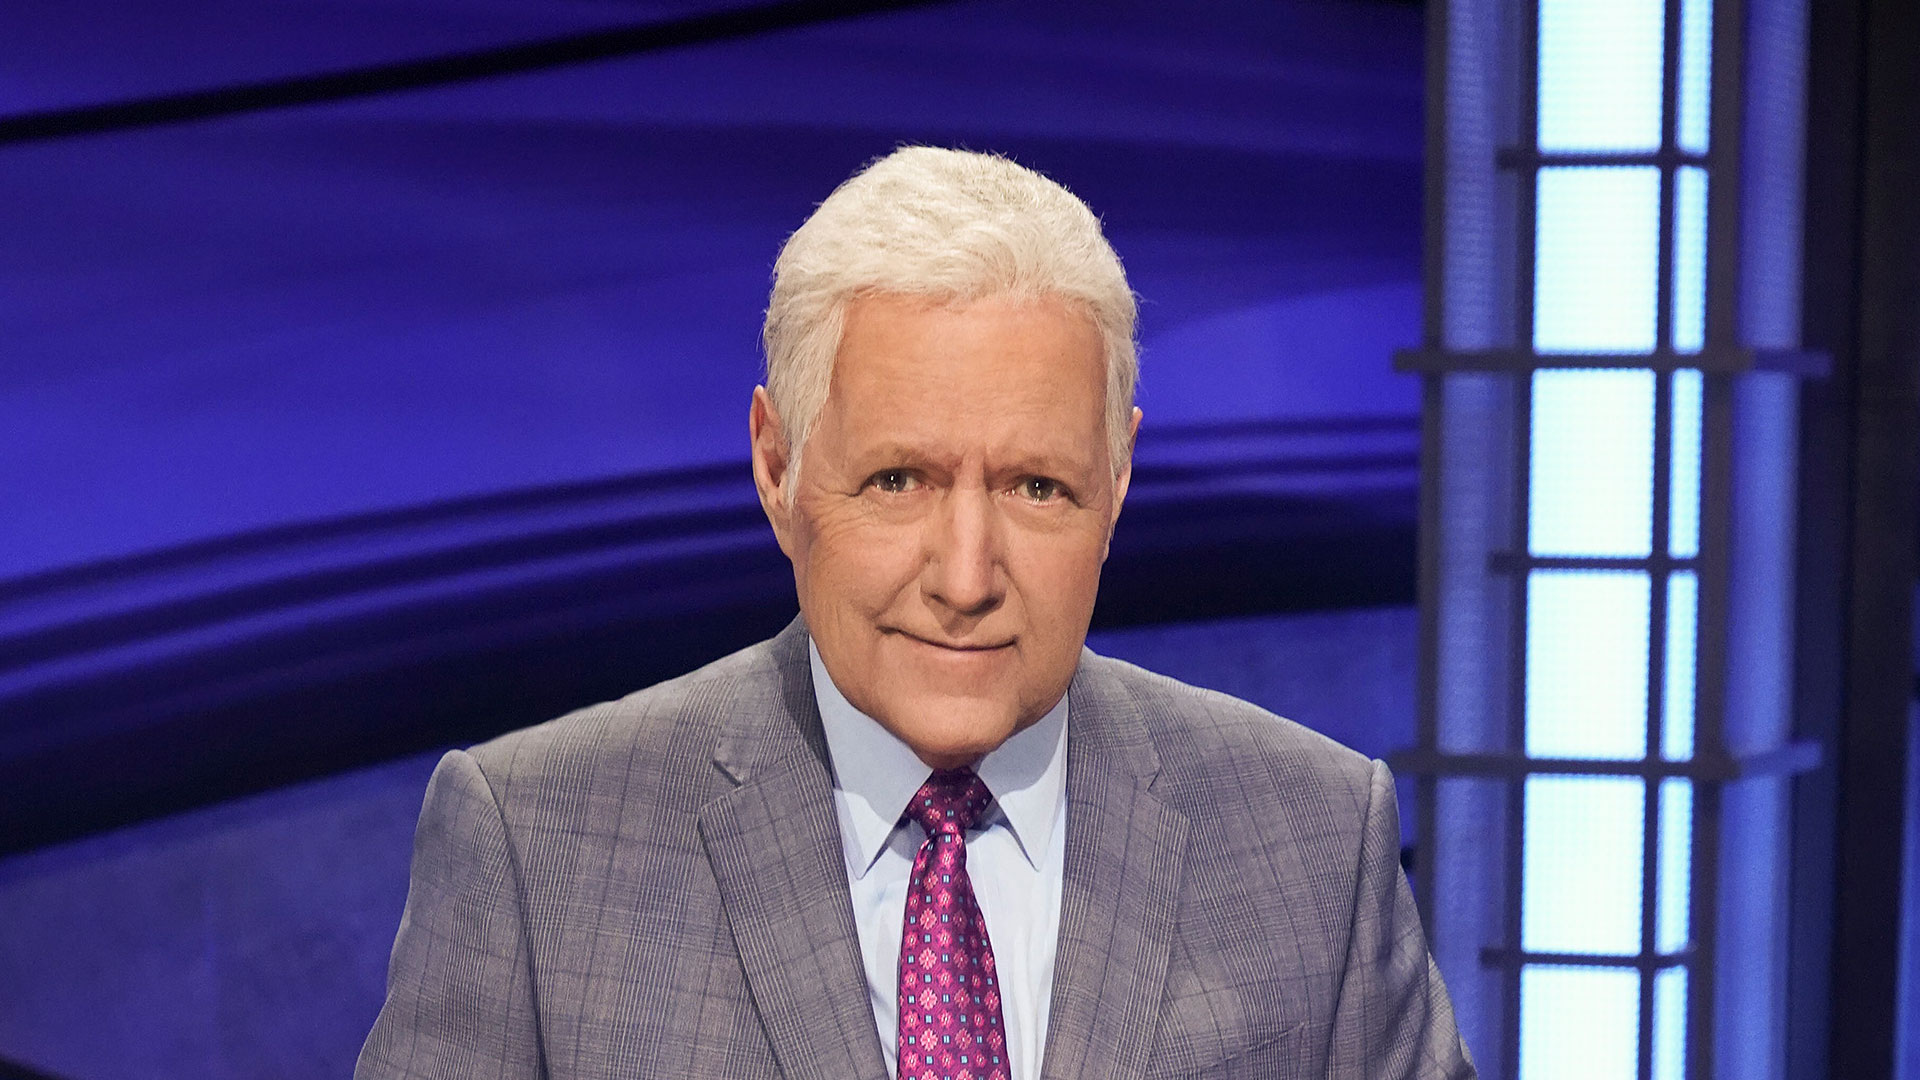 Jeopardy! fans honor late Alex Trebek on 84th birthday as they remember ‘joy’ host brought viewers in sweet tributes [Video]